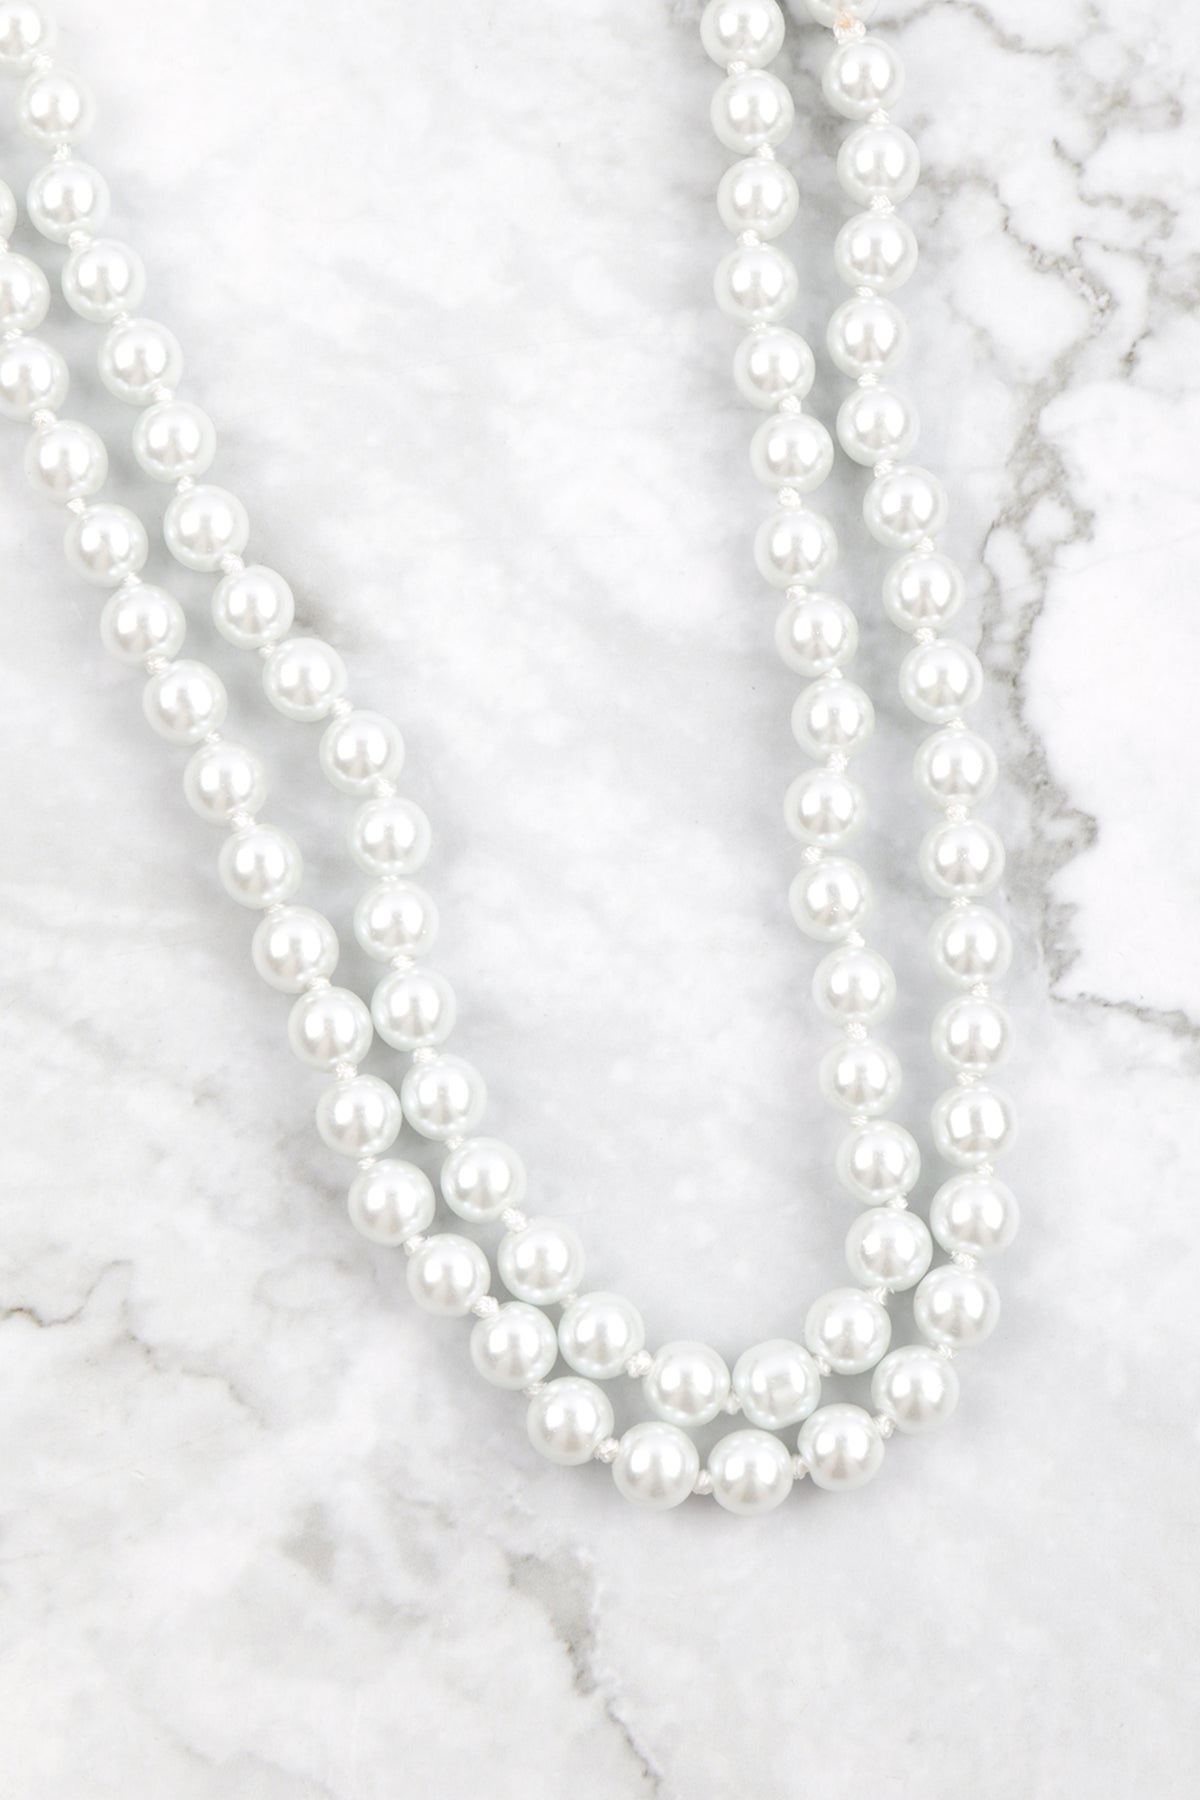 8MM PEARL KNOTTING LAYERED 48 NECKLACE AND EARRING SET